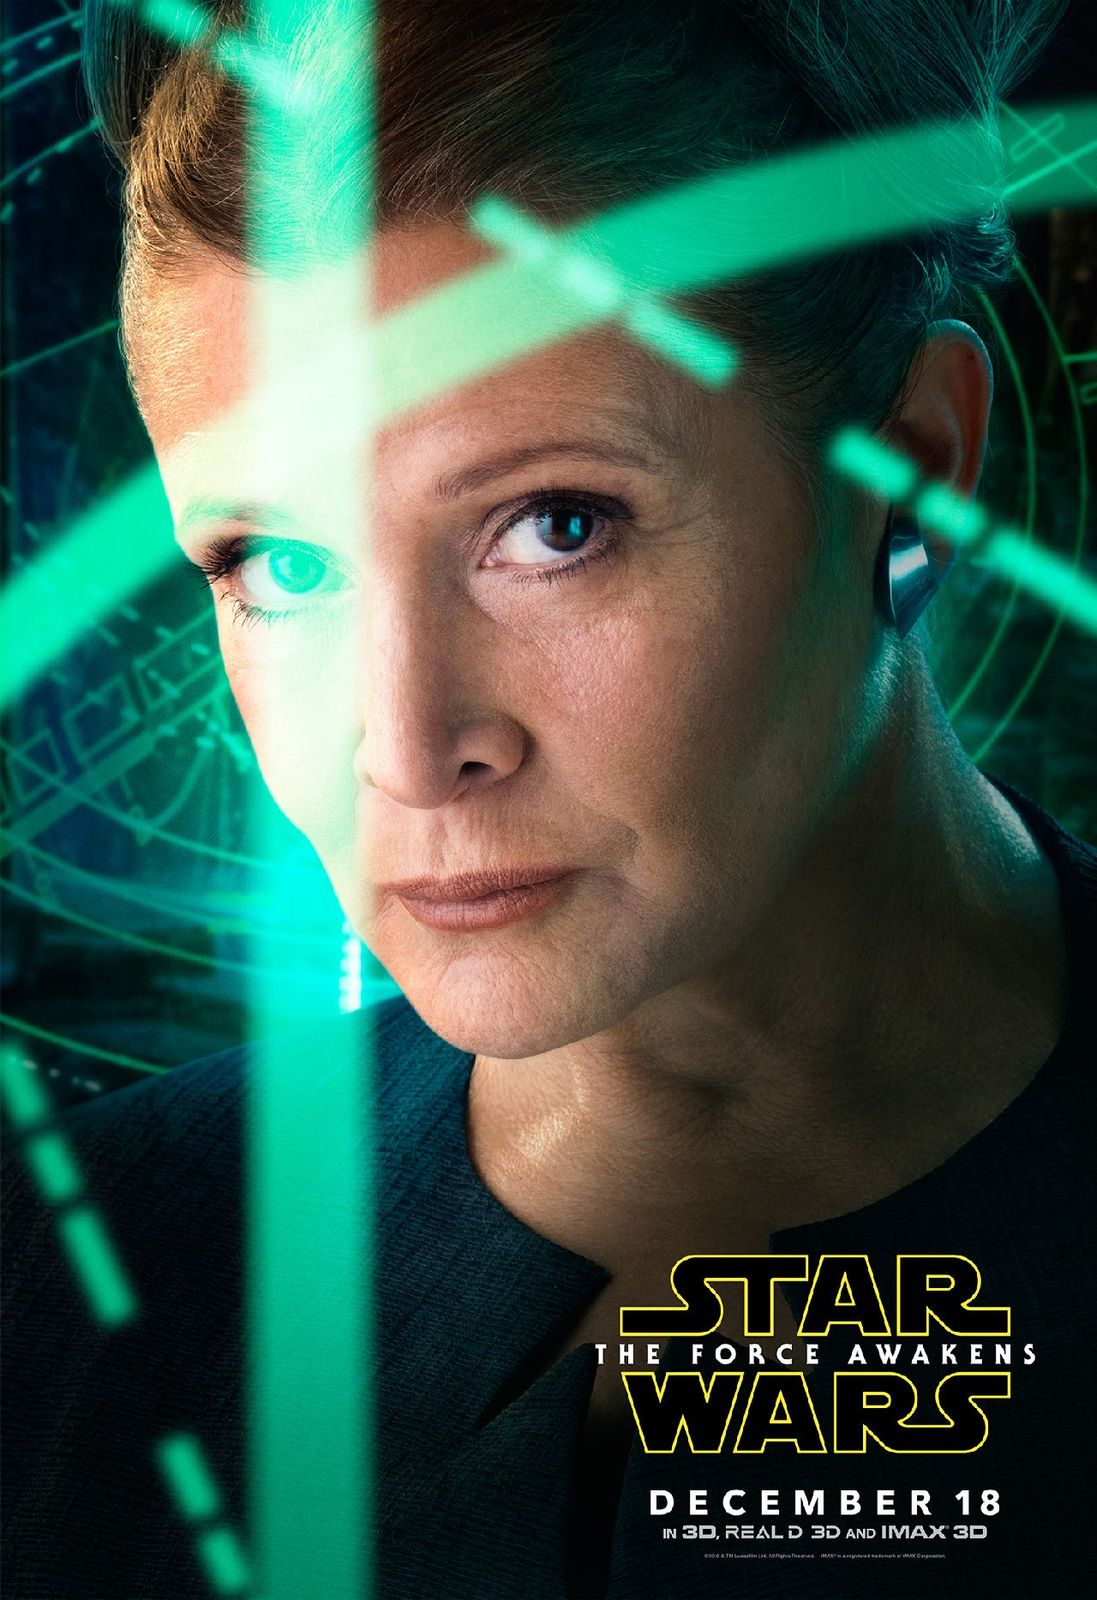 New Character Posters For Star Wars: The Force Awakens Released